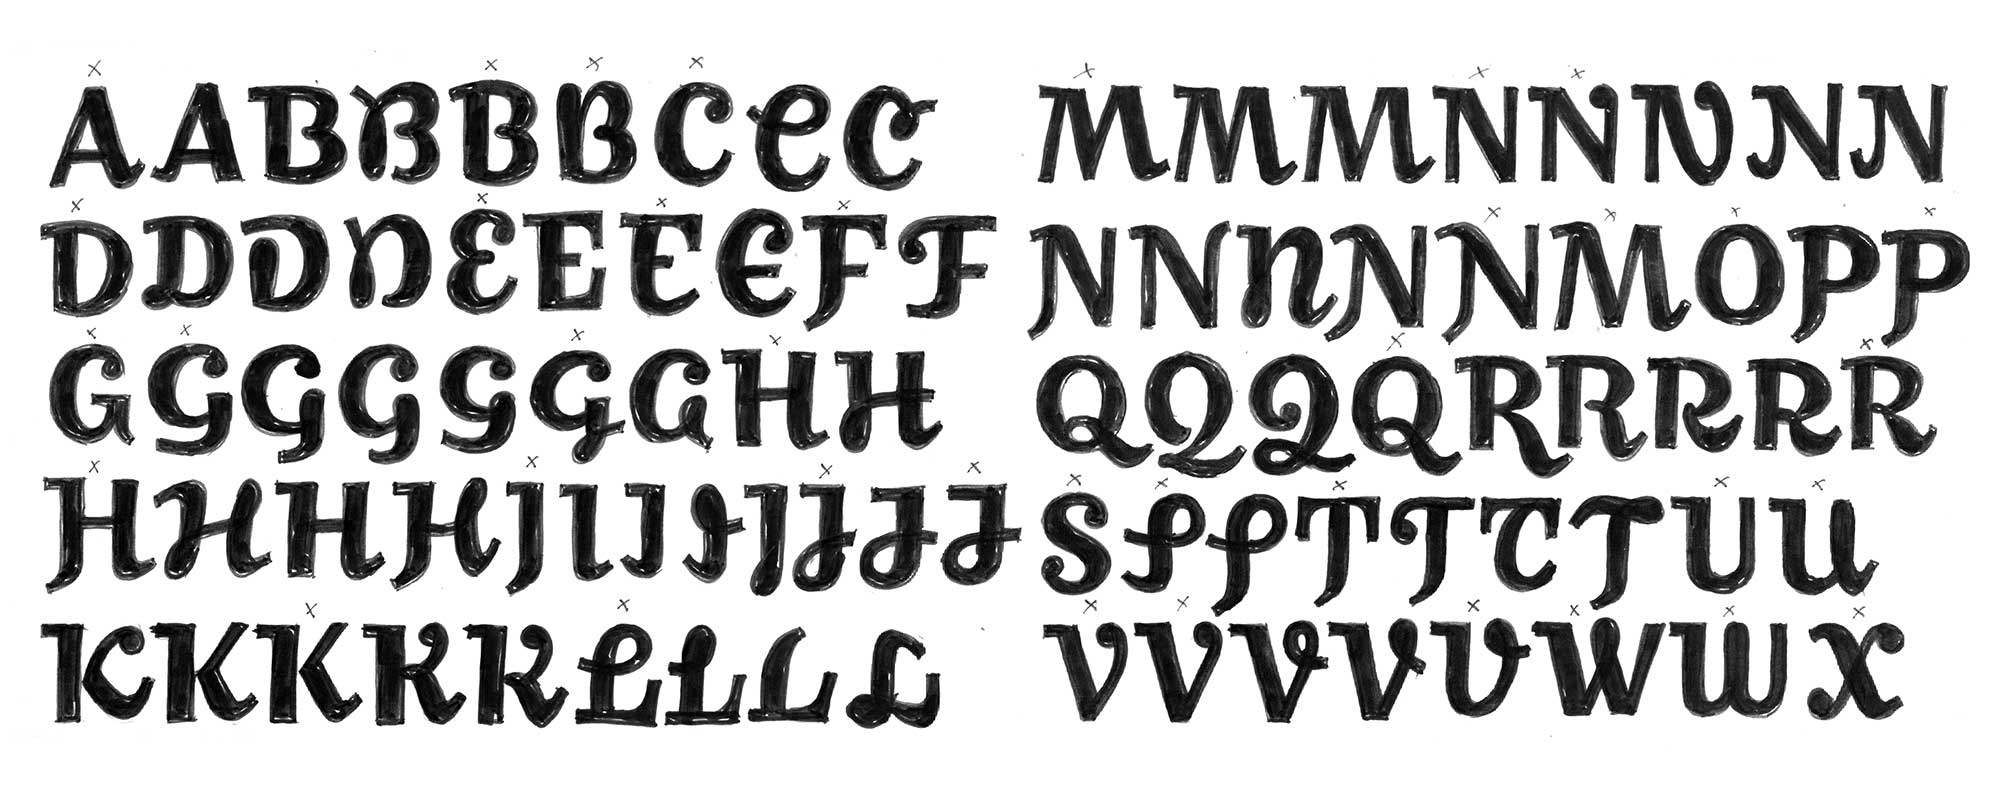 Various versions of the uppercase letters A to X